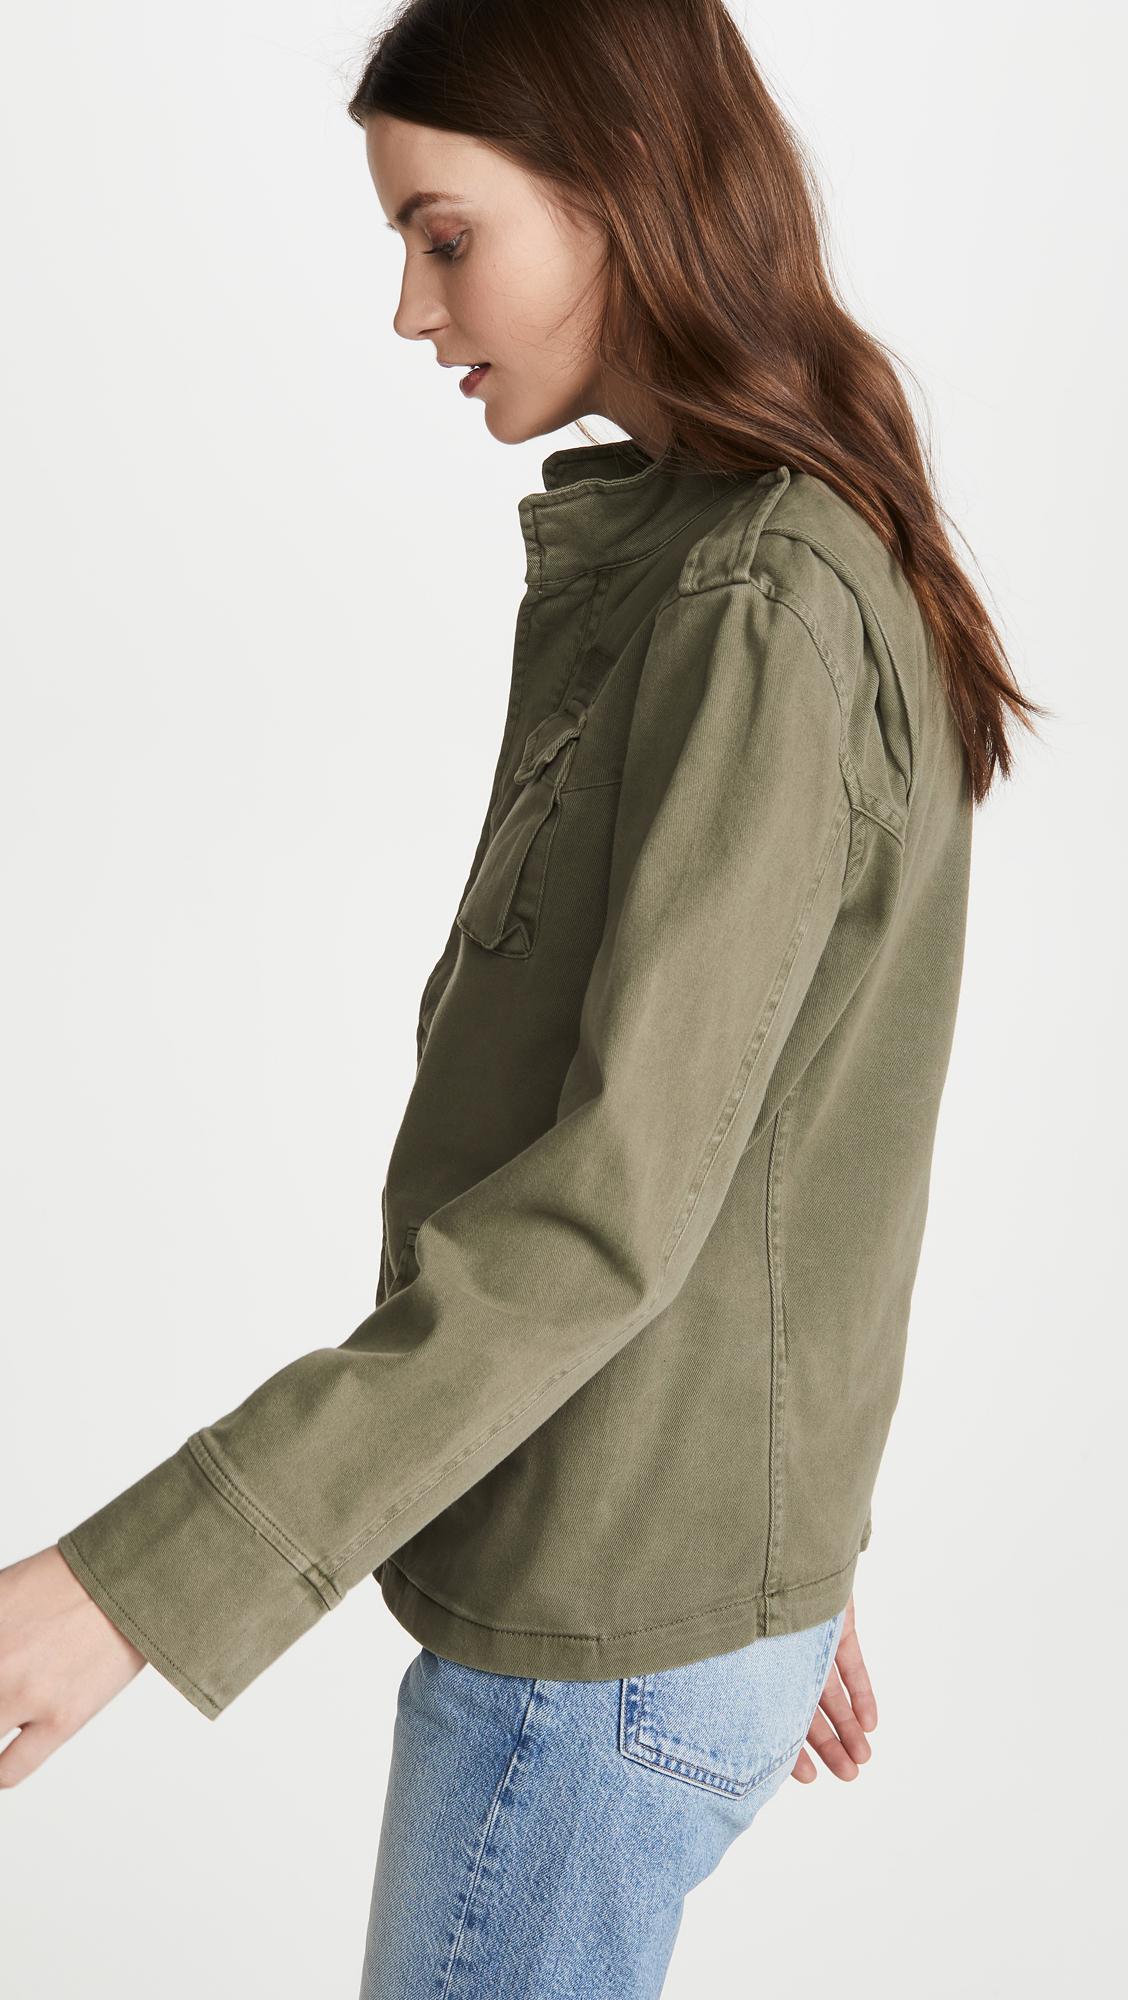 Anine Bing Cotton Army Jacket in Army Green (Green) - Lyst